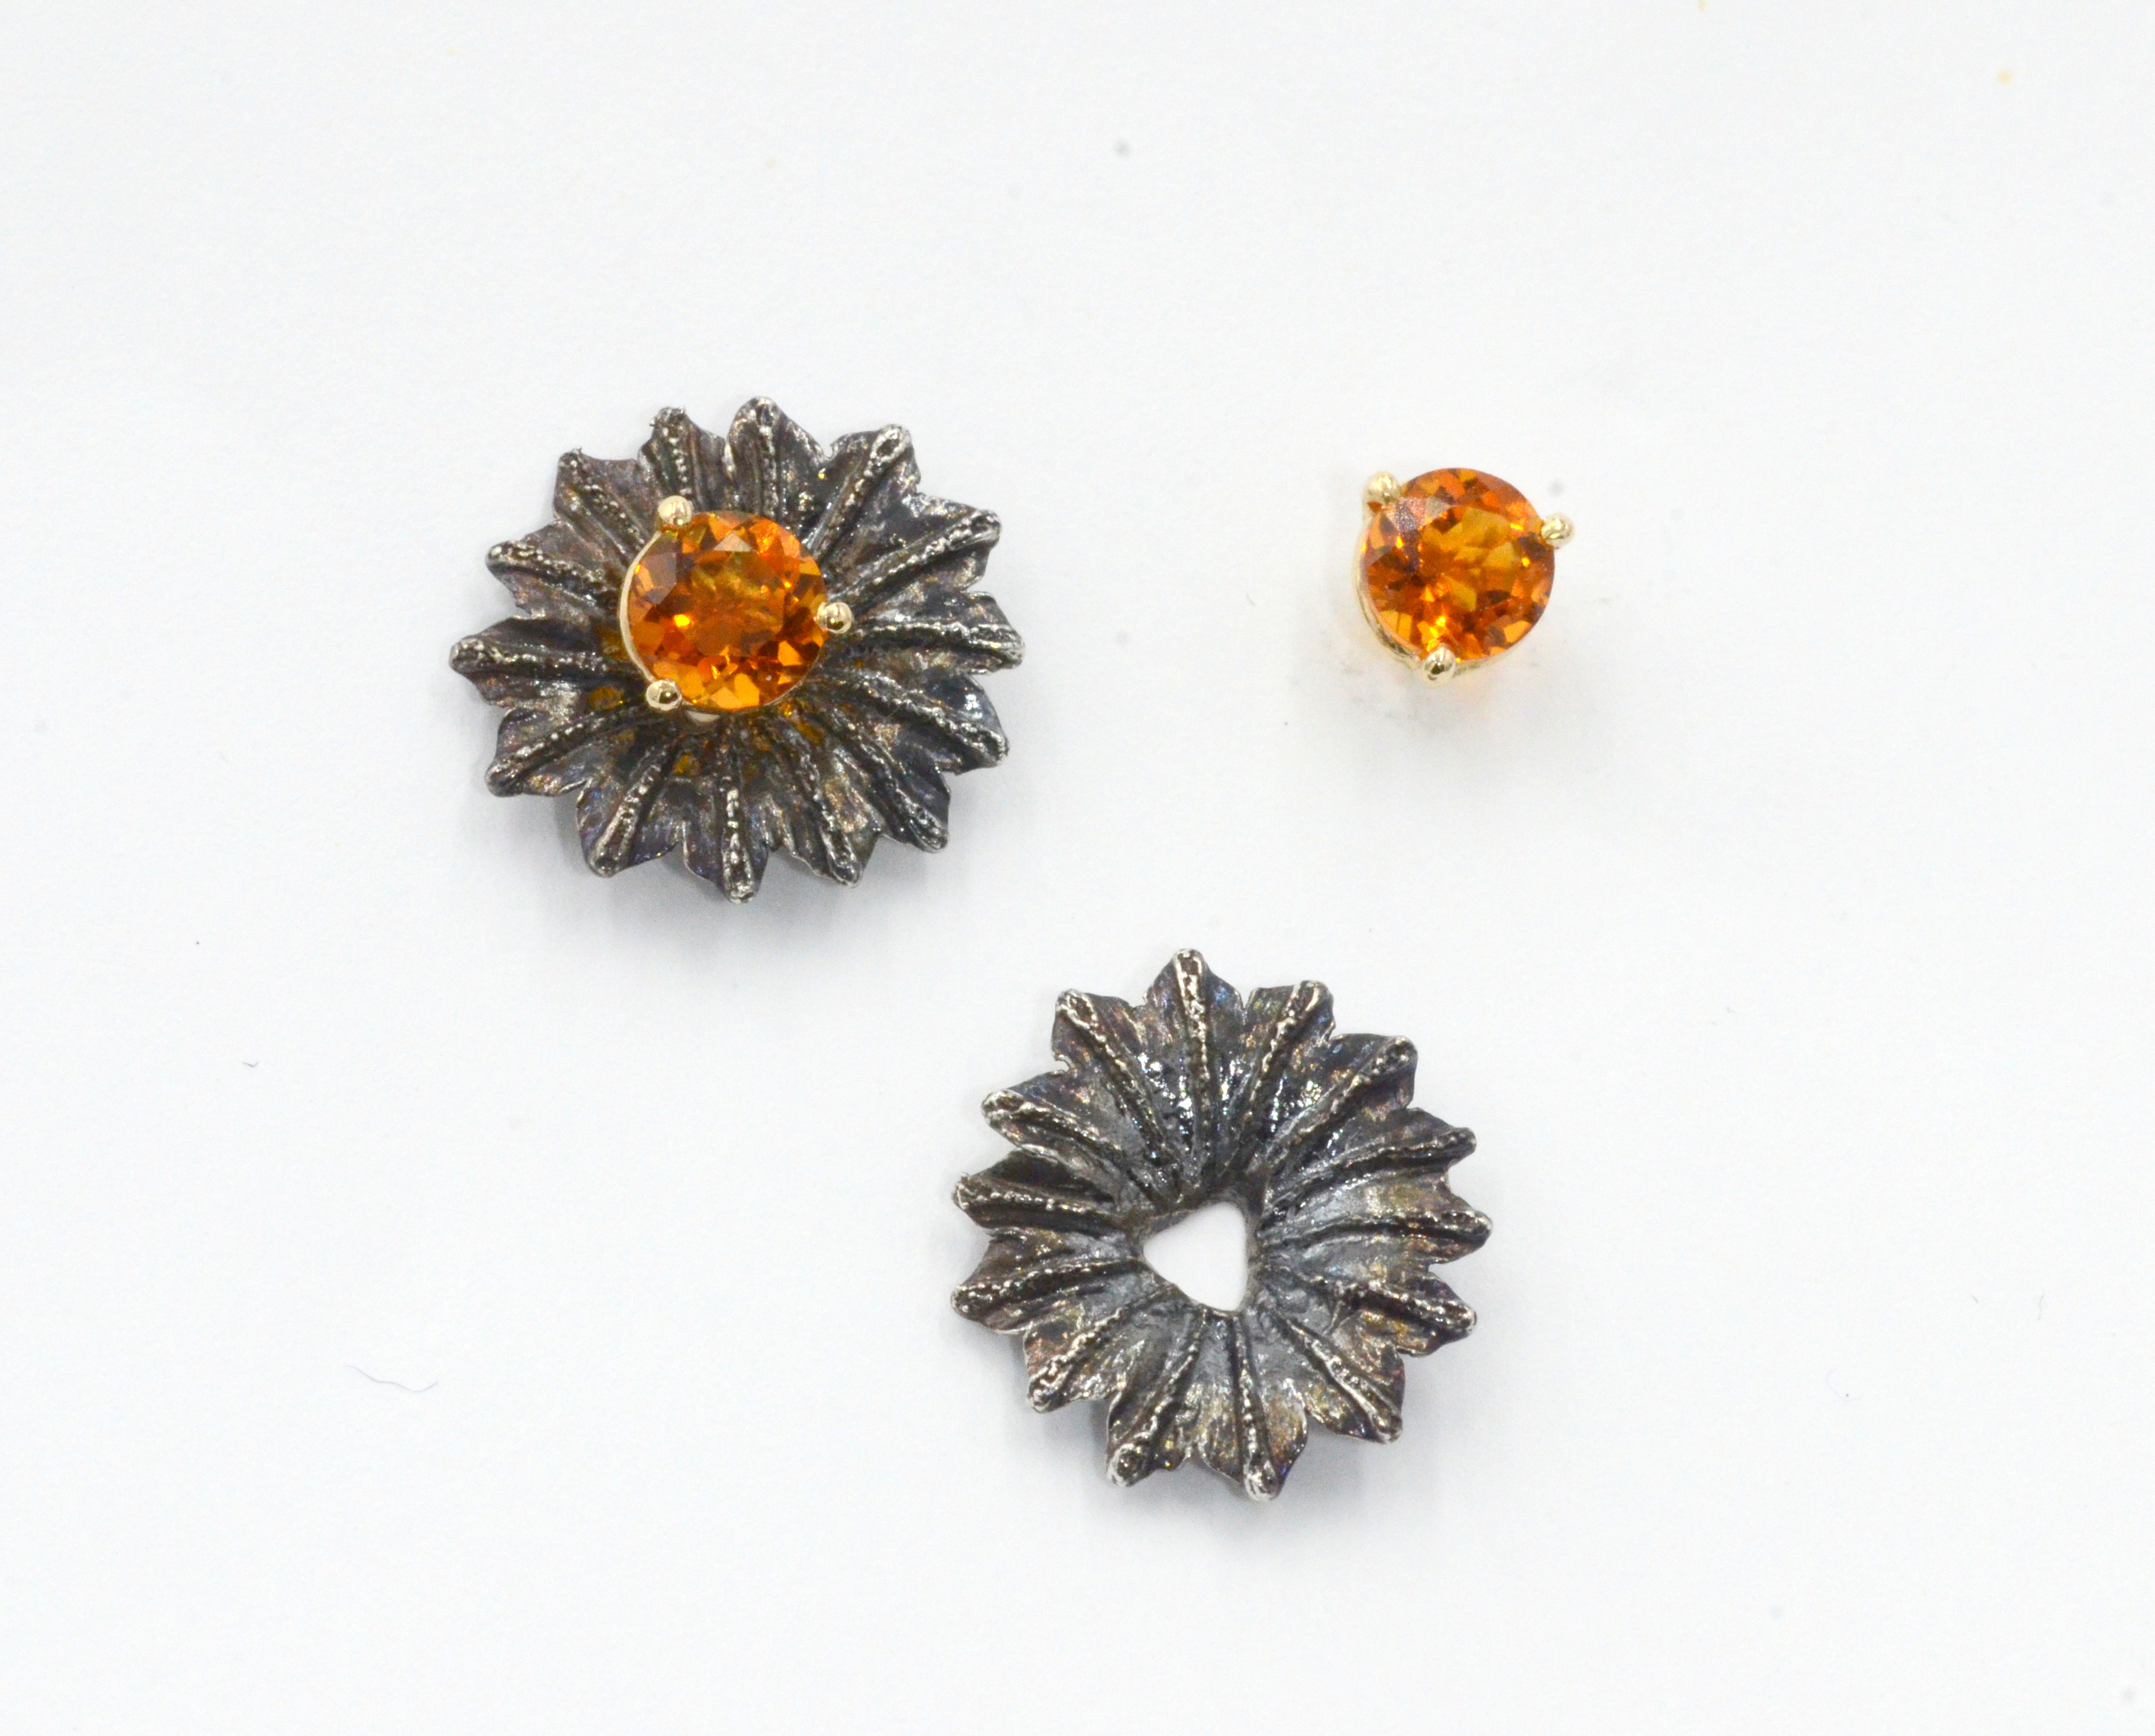 Solid Sterling Silver Poppy Flower tops designed as jackets to accompany stud earrings. 1/2 ' diameter. Silver has been oxidized to accentuate the natural texture.